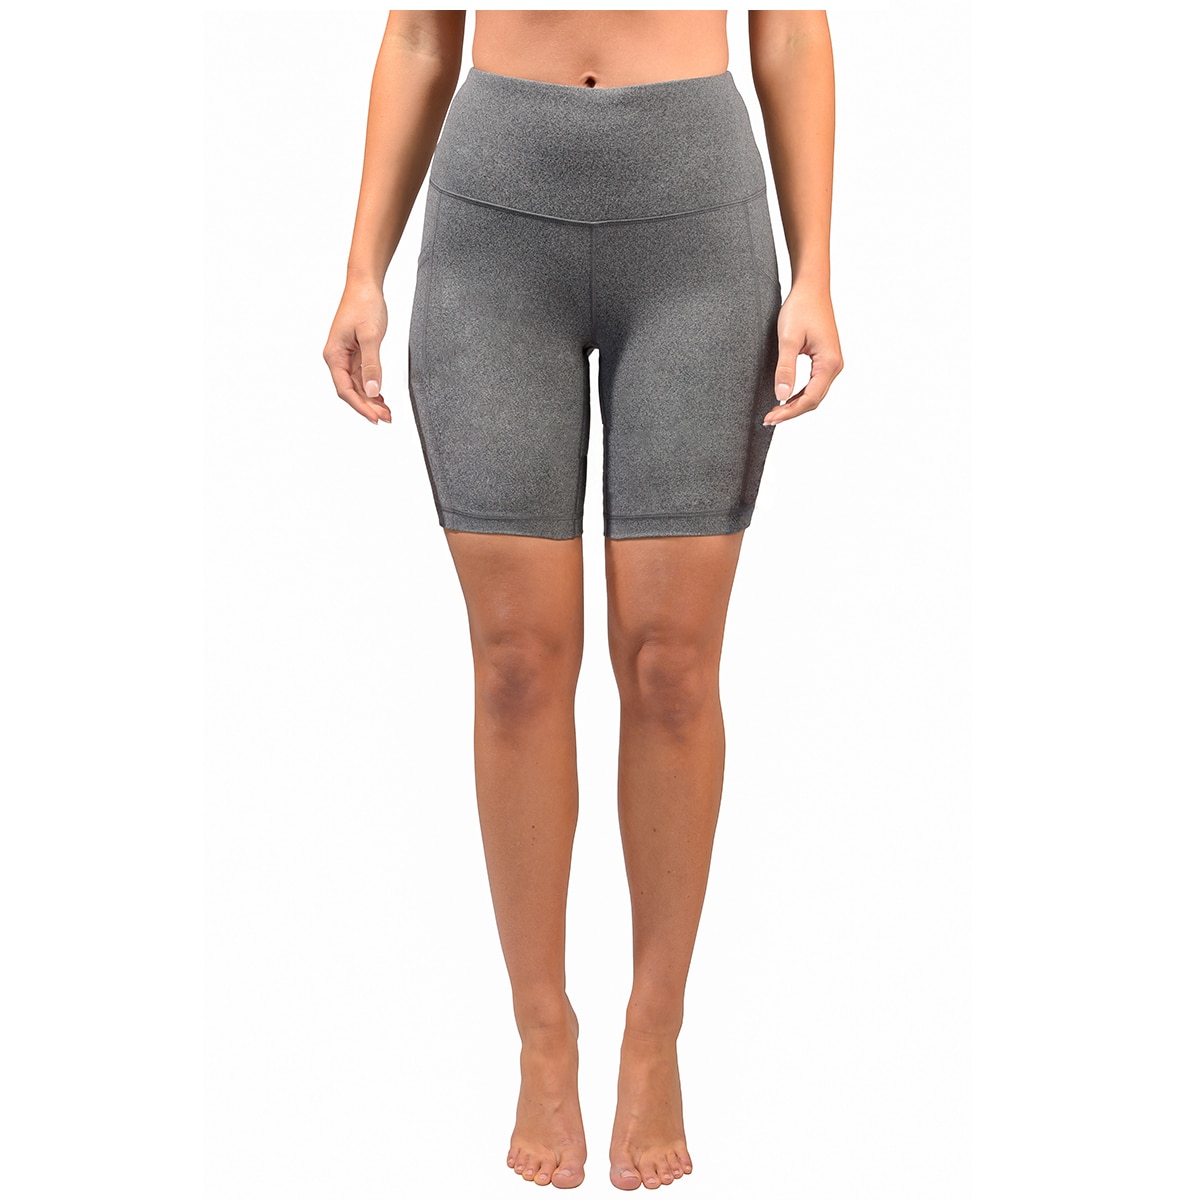 90 Degree by Reflex Yoga Shorts Are So Breathable and Affordable